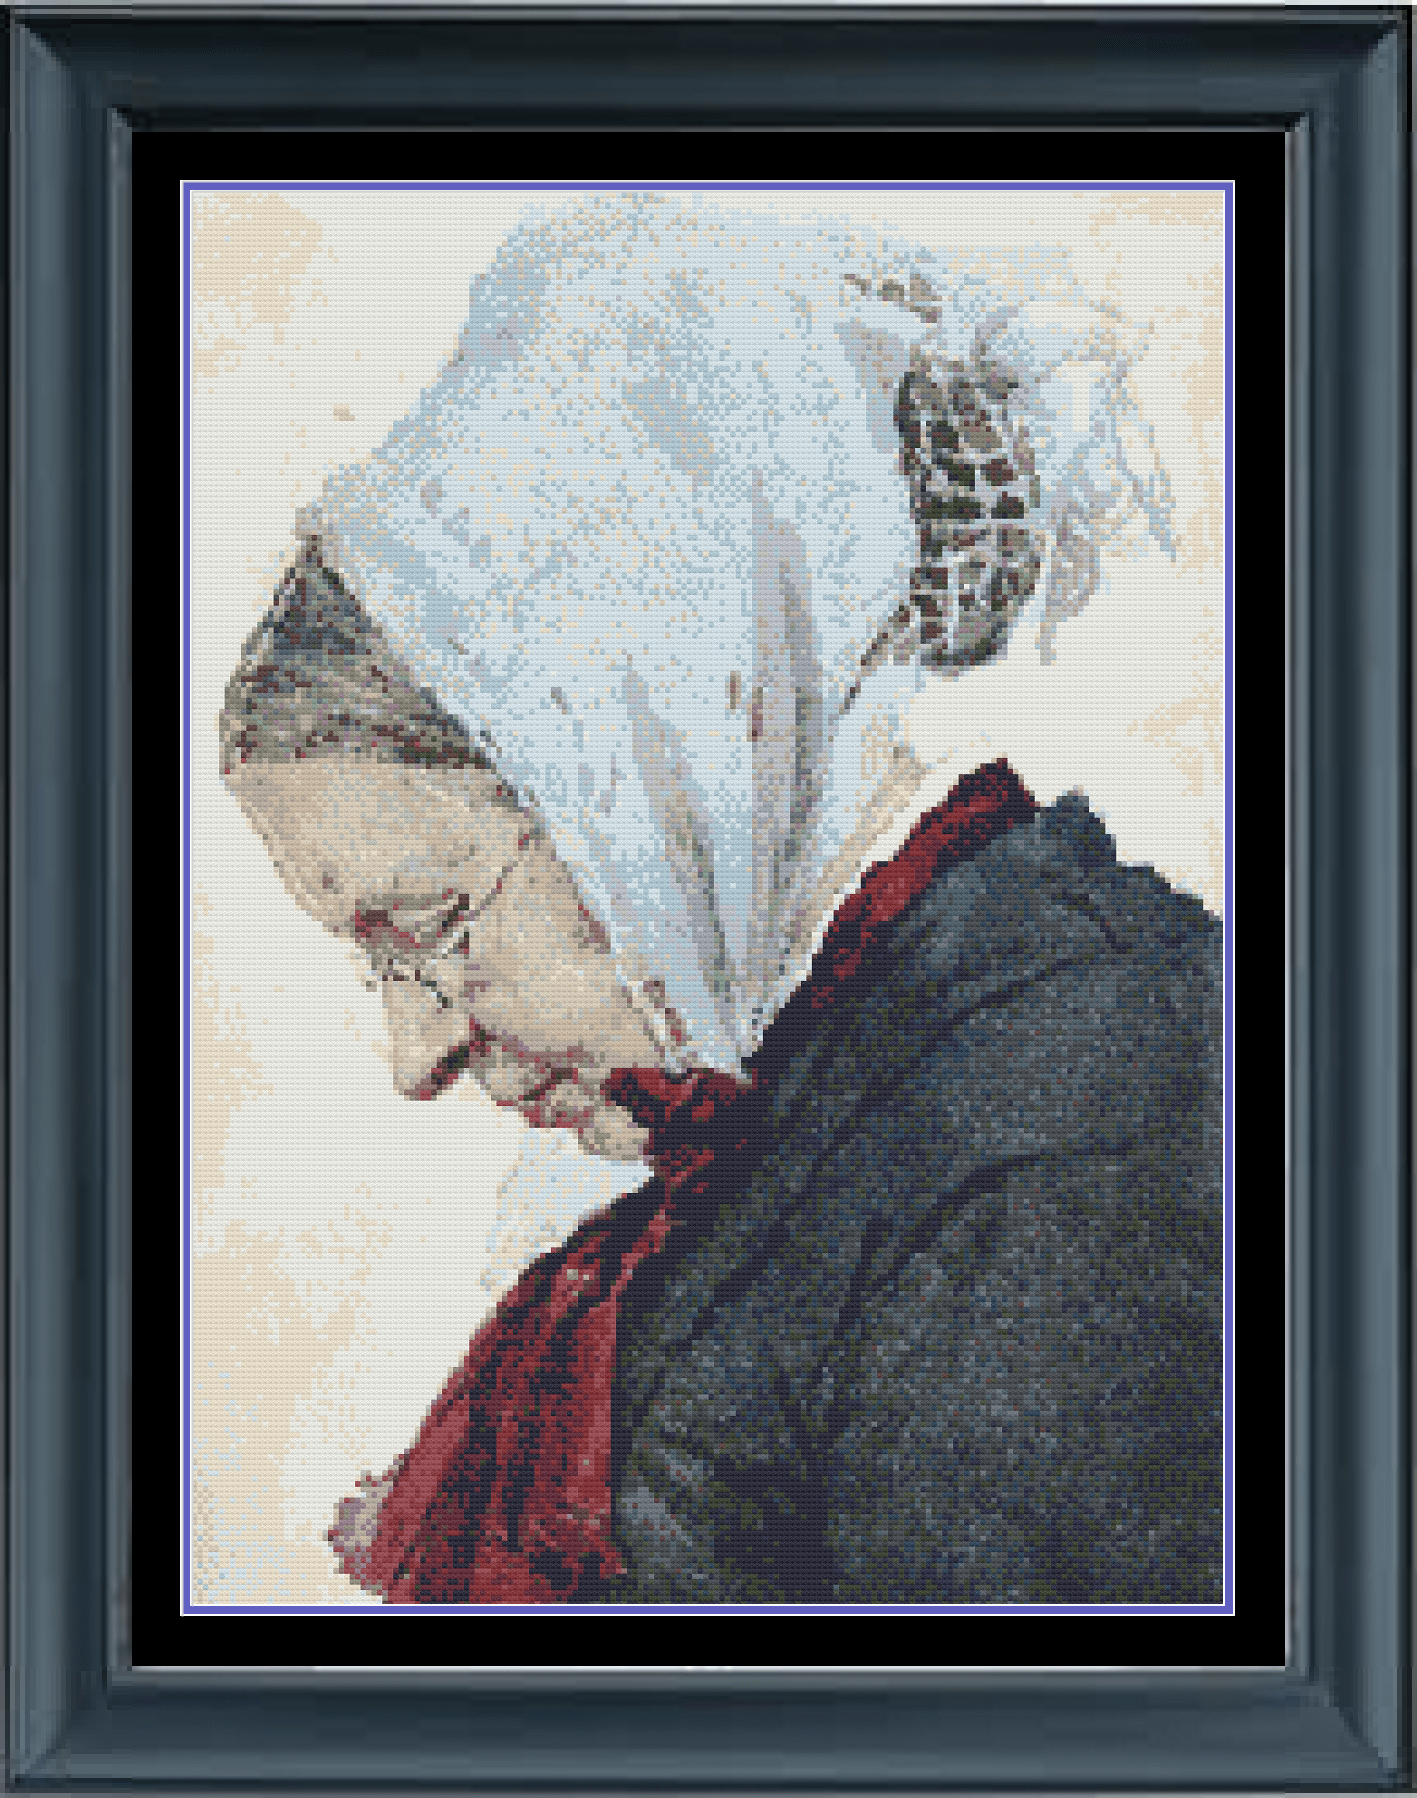 Stitching Jules Design Cross Stitch Pattern Grateful Mother Grandmother Praying Religious Vintage Cross Stitch Embroidery Needlepoint Digital Pattern Ready For Instant Download